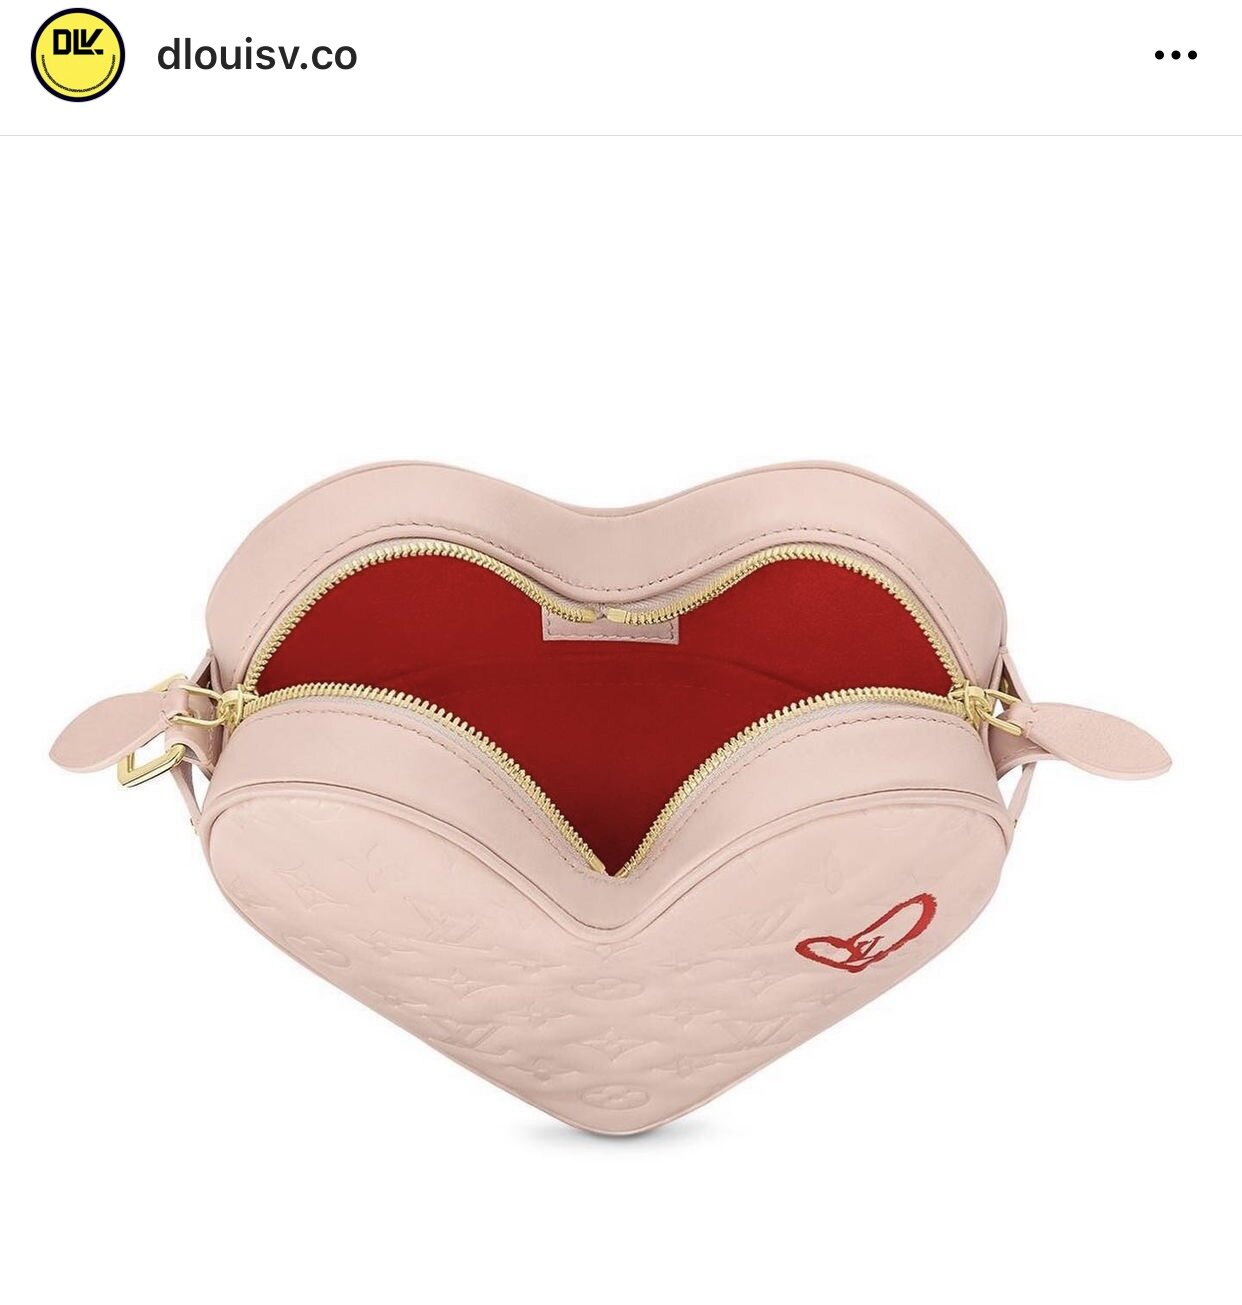 Fremmed mammal Sprællemand NEW Louis Vuitton Heart Bag COMING SOON 2021 — Collecting Luxury